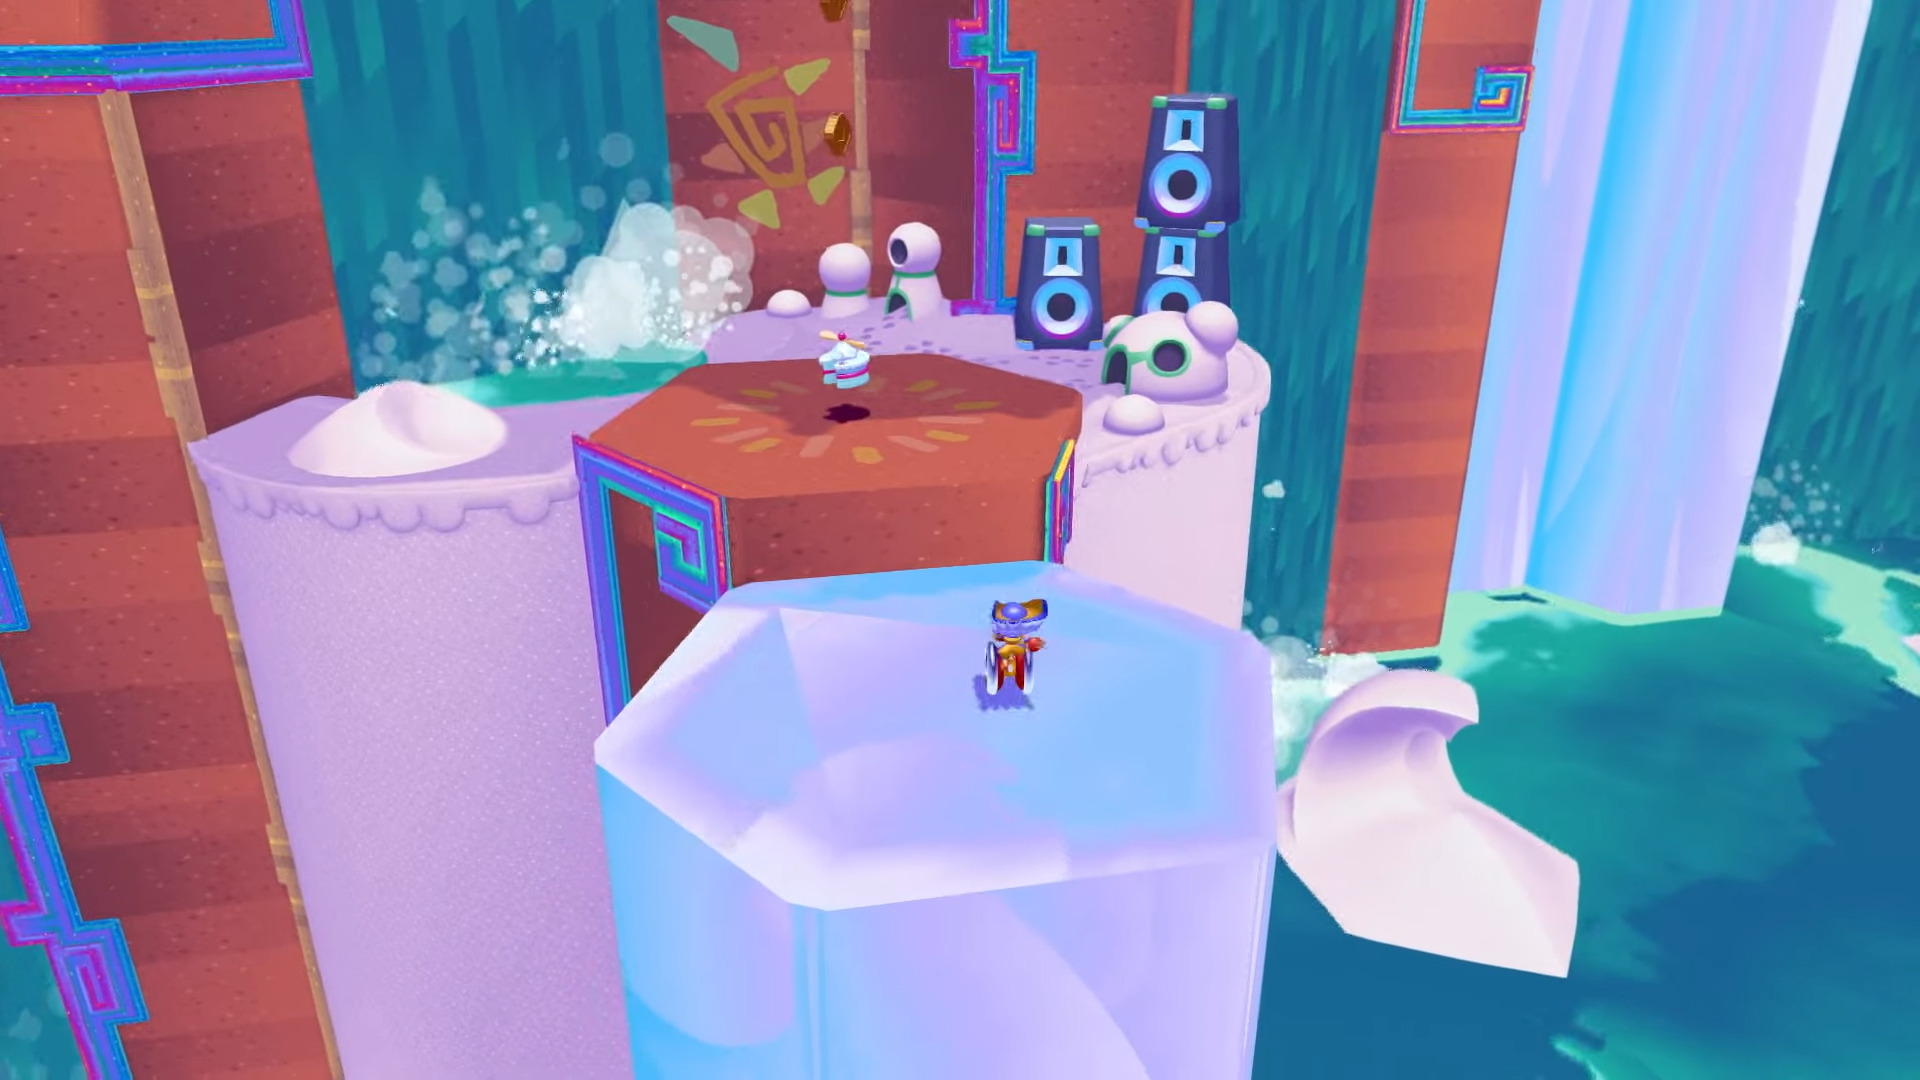 The player character in Penny's Big Breakaway platforming through a waterfall-filled area